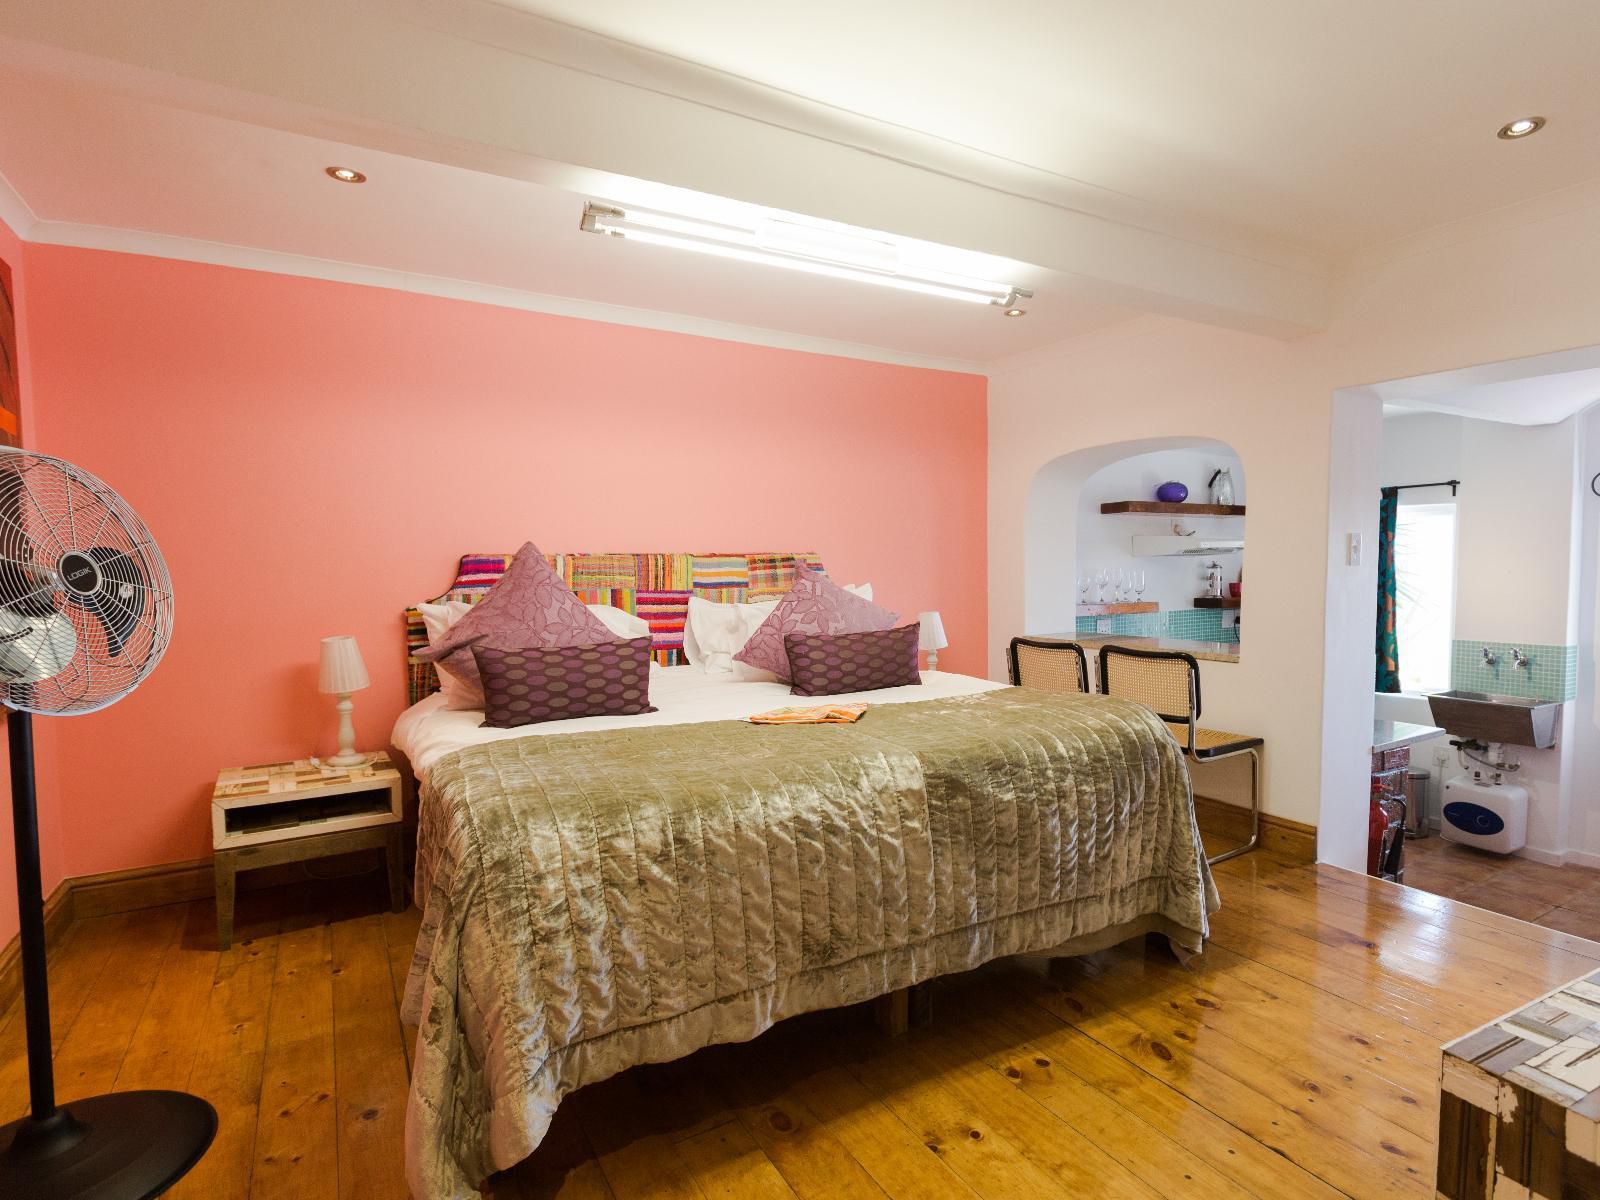 Sweetest Apartments Sea Point Cape Town Western Cape South Africa Bedroom